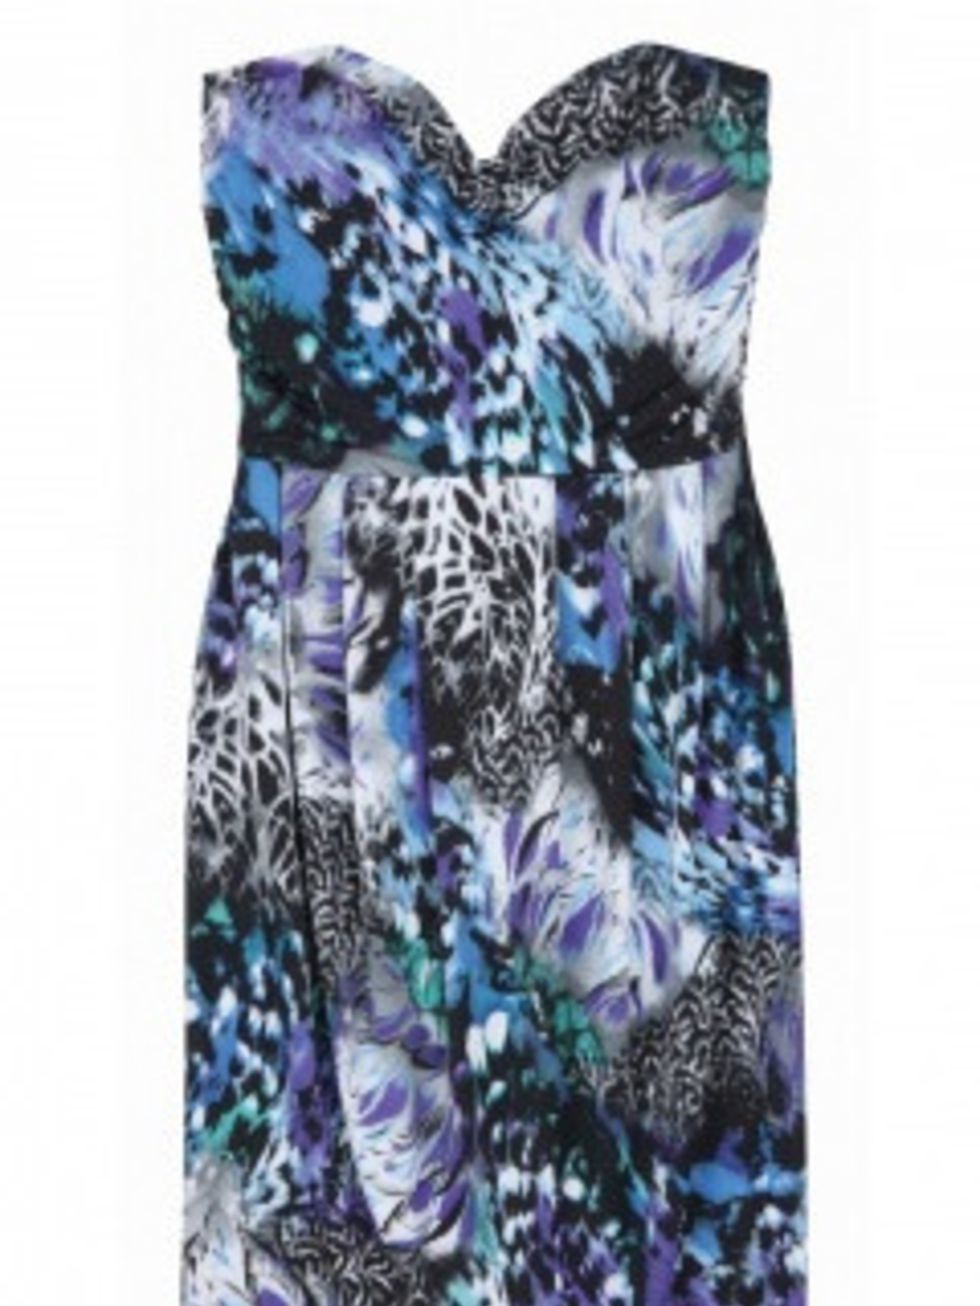 <p>This strapless dress is part global traveller (thanks to the animal print) and part techno print (showcased at Proenza Schouler and Alexander McQueen). Pair it with sandals and a blazer.Dress, £78 by Supertrash at <a href="http://www.my-wardrobe.com/su